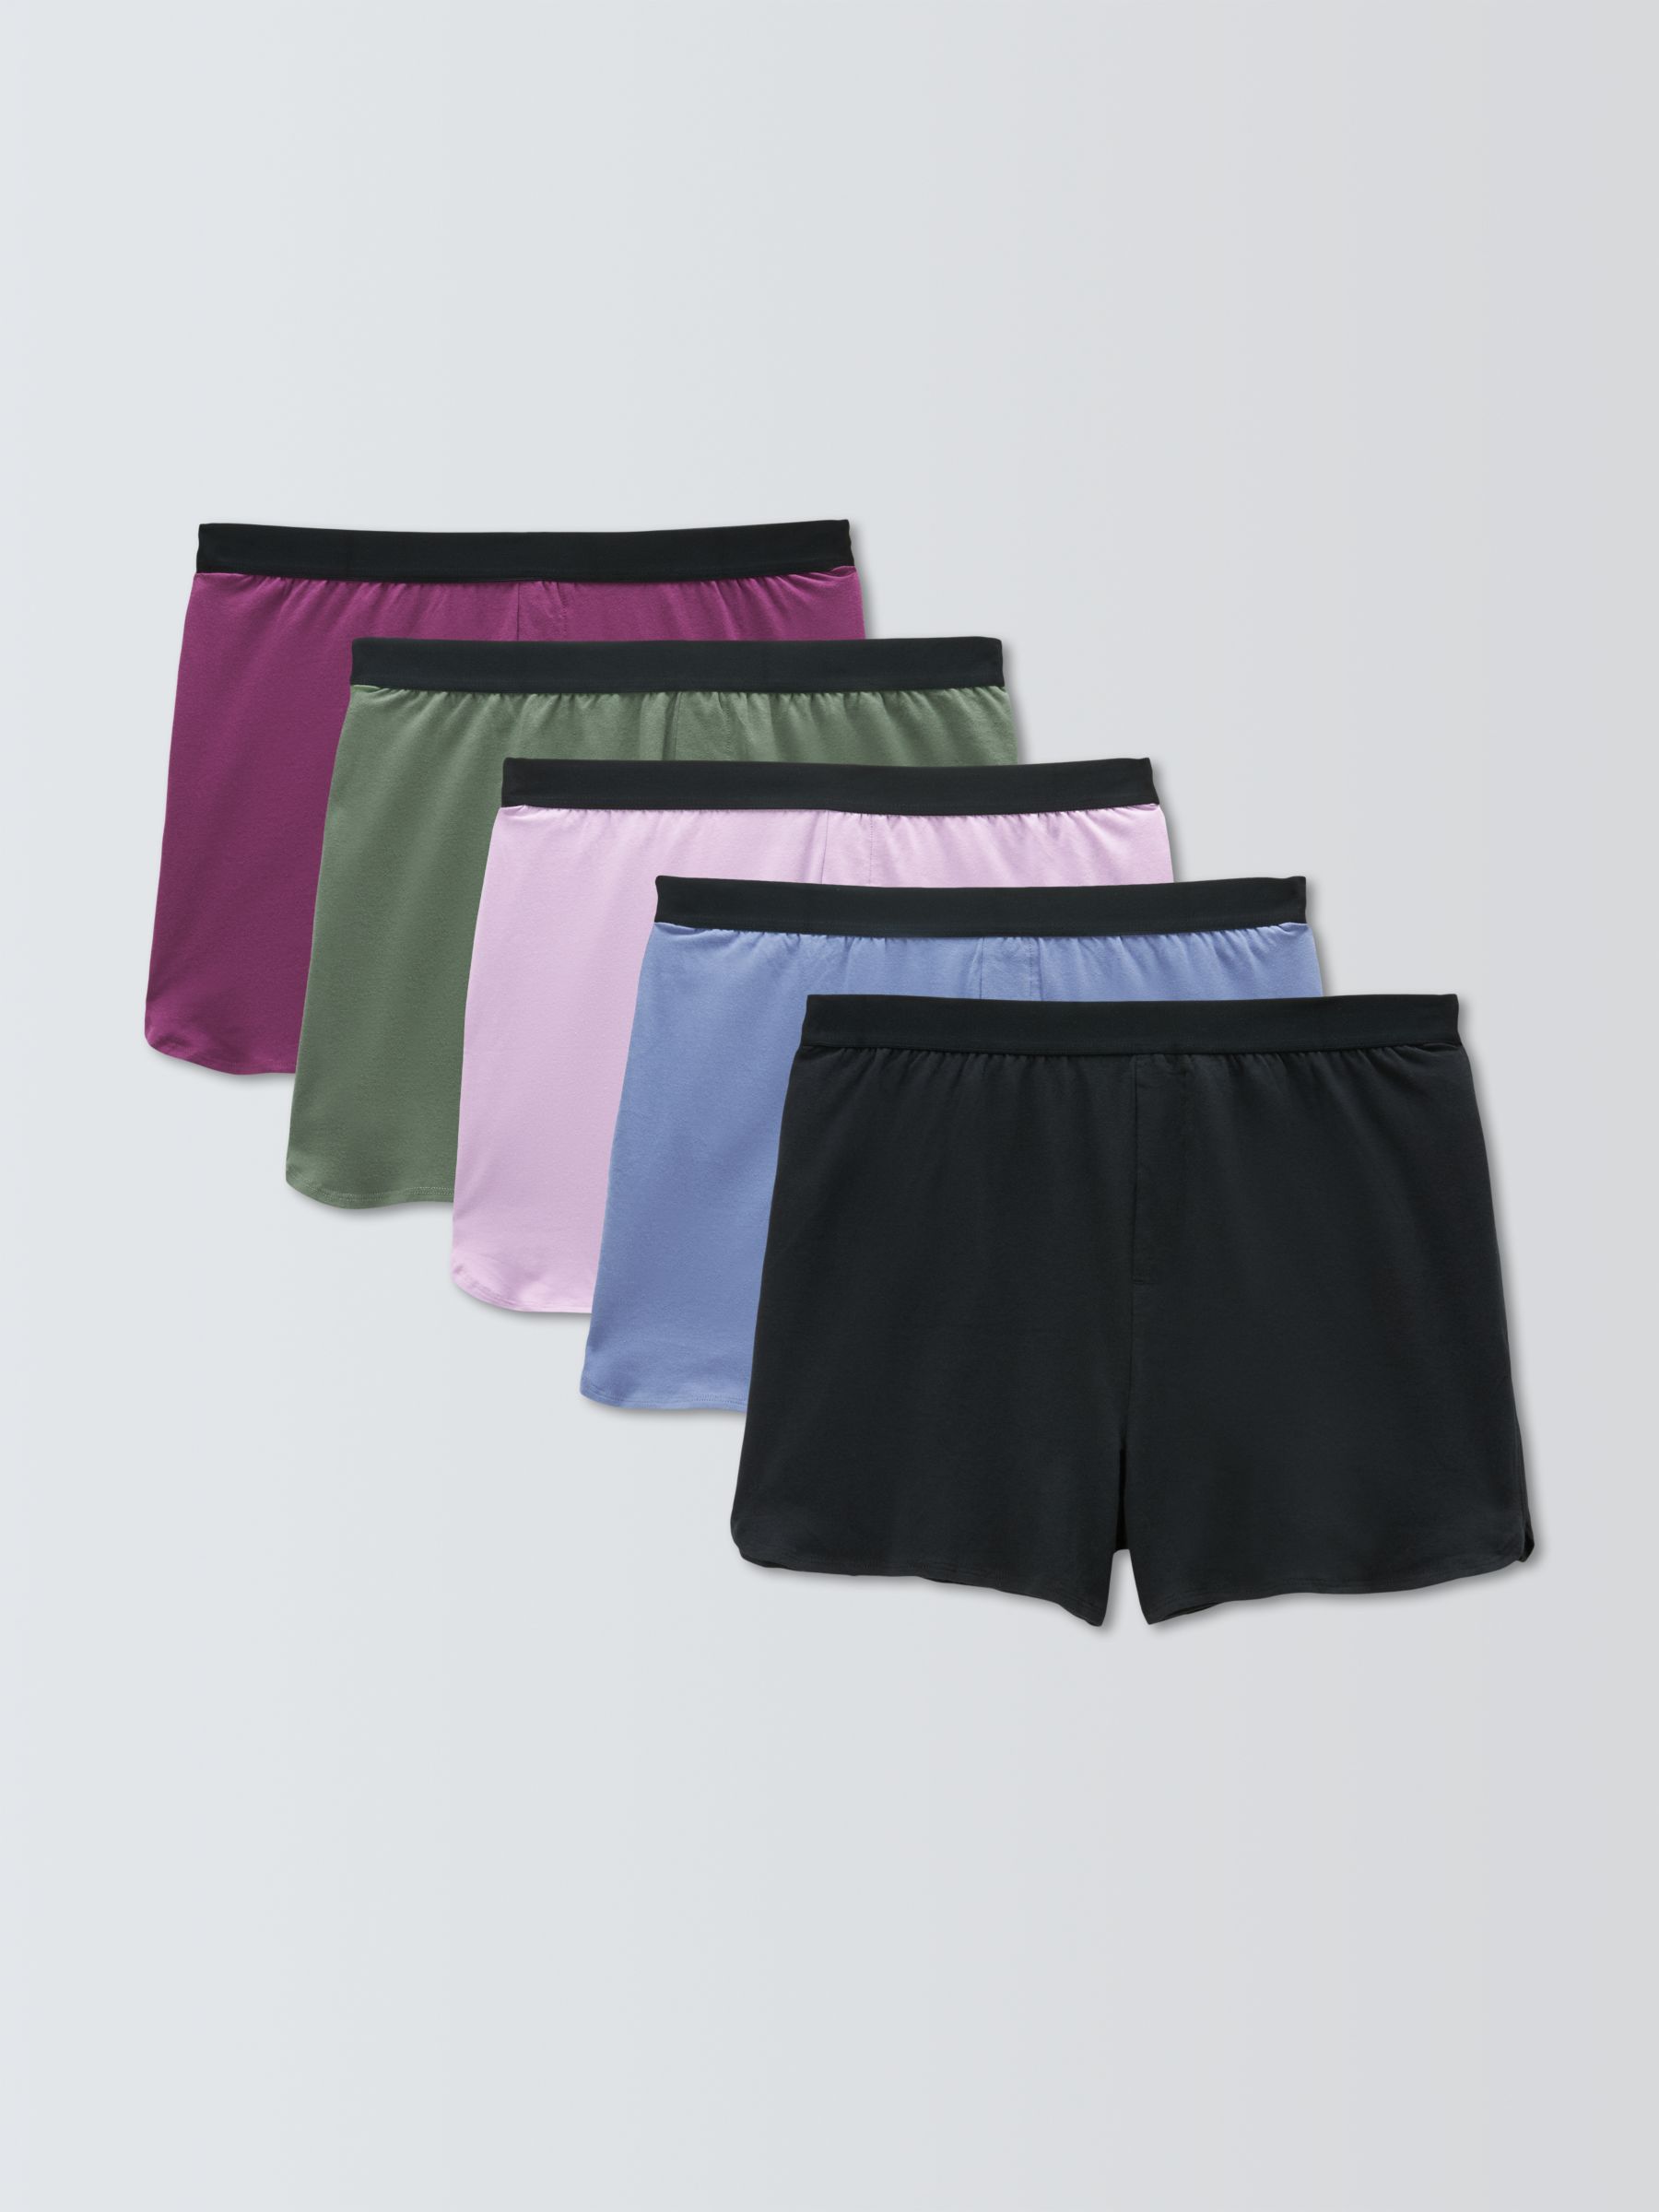 John Lewis ANYDAY Cotton Boxers, Pack of 5, Plain, XL